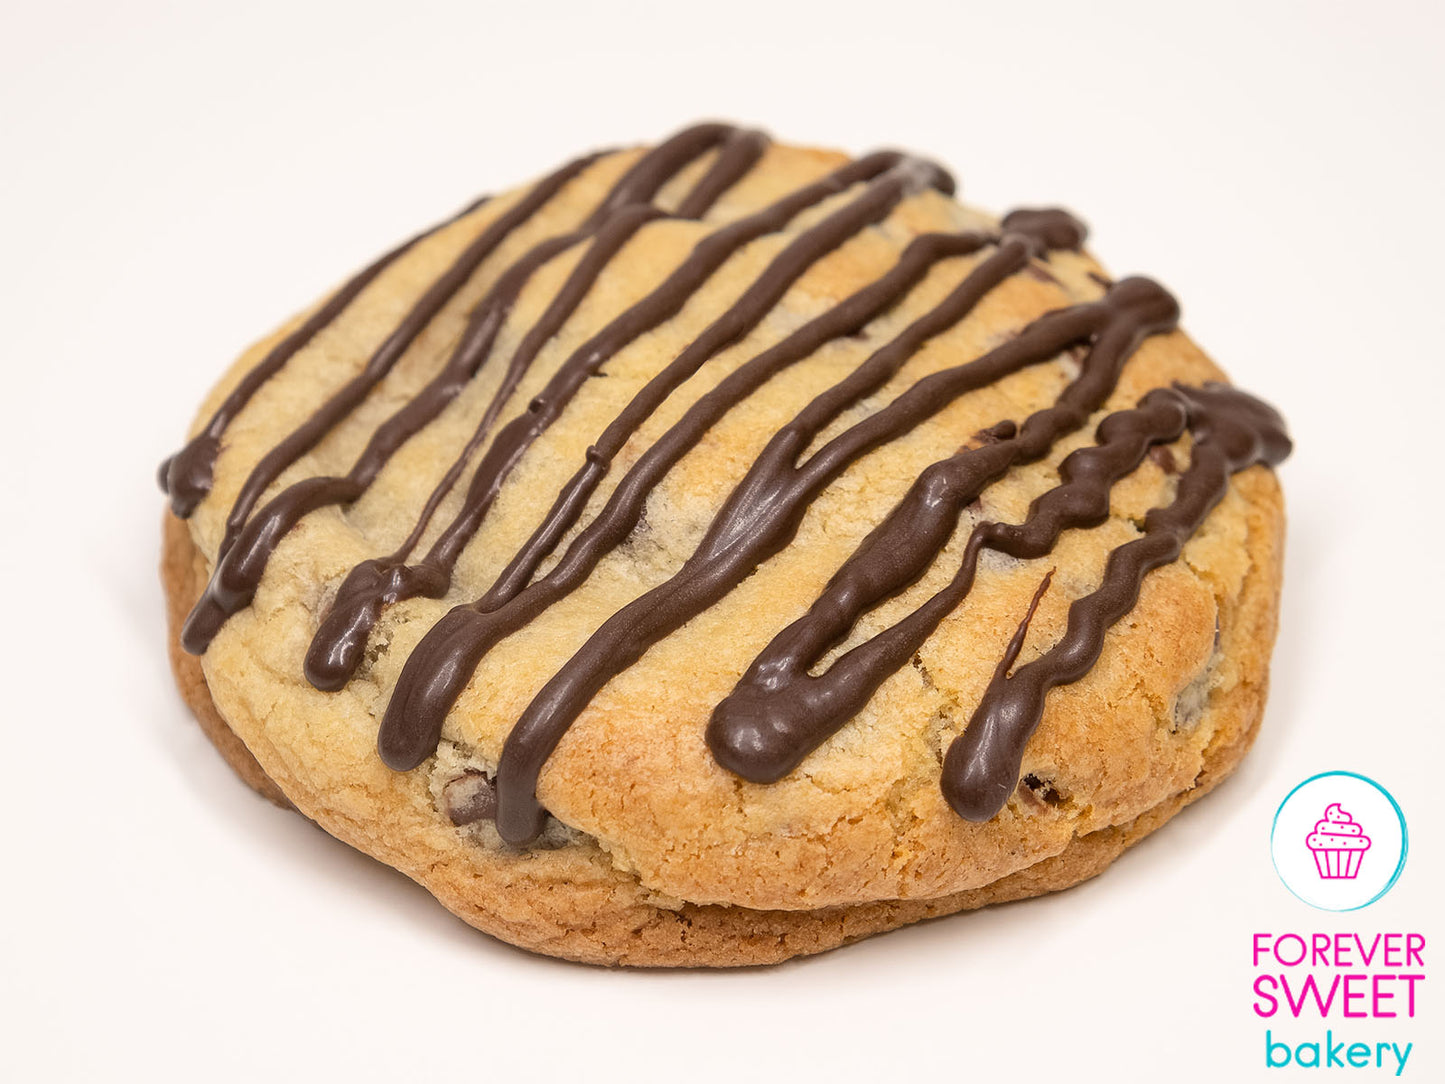 Big Dipper - Chocolate Drizzle Chocolate Chip Cookies - 4 PK